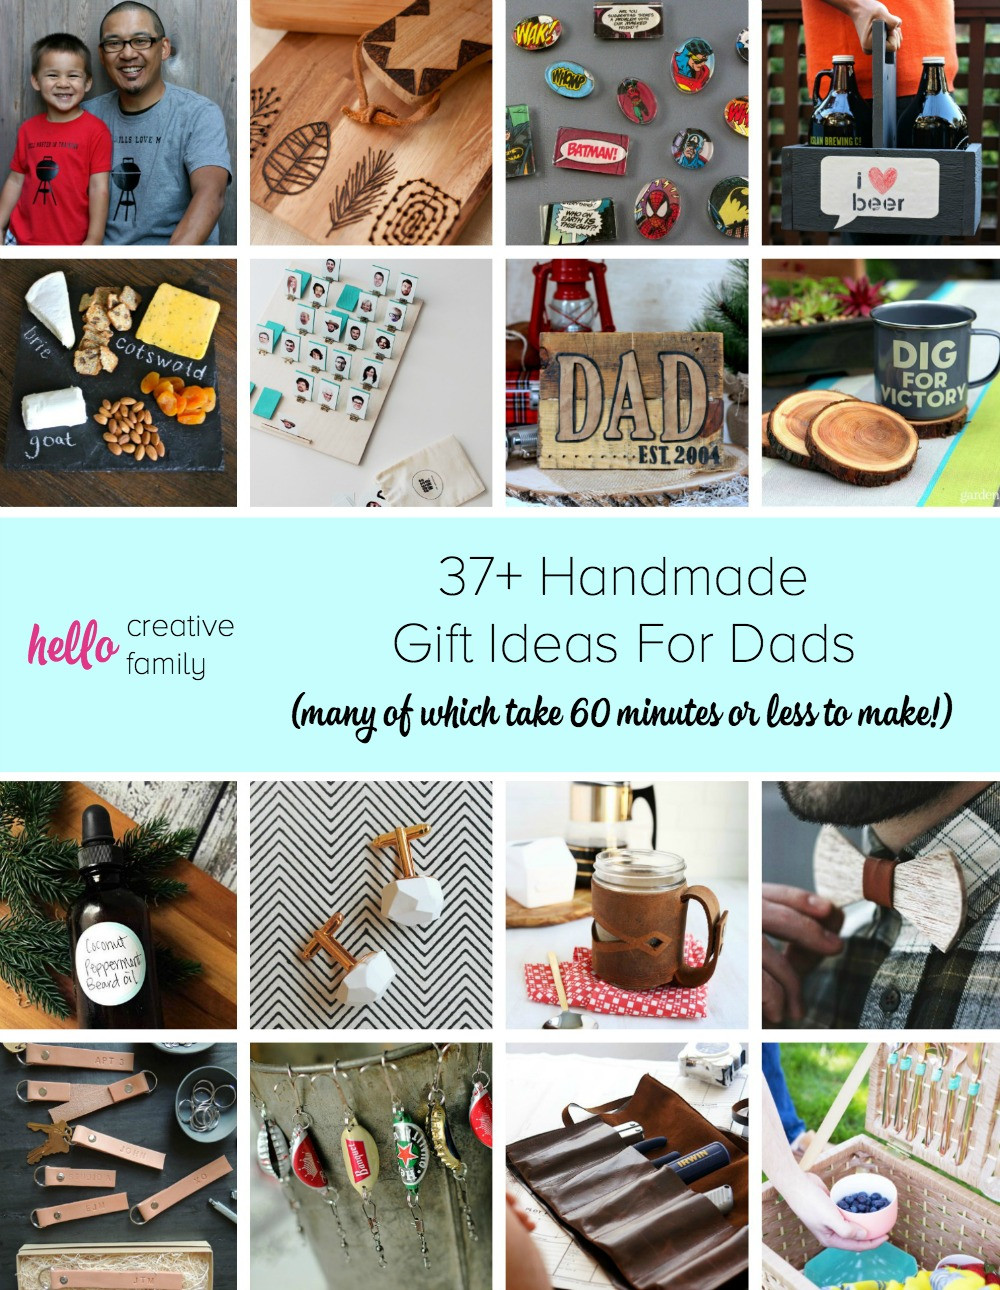 24 Ideas for Homemade Birthday Gifts for Dad – Home, Family, Style and ...